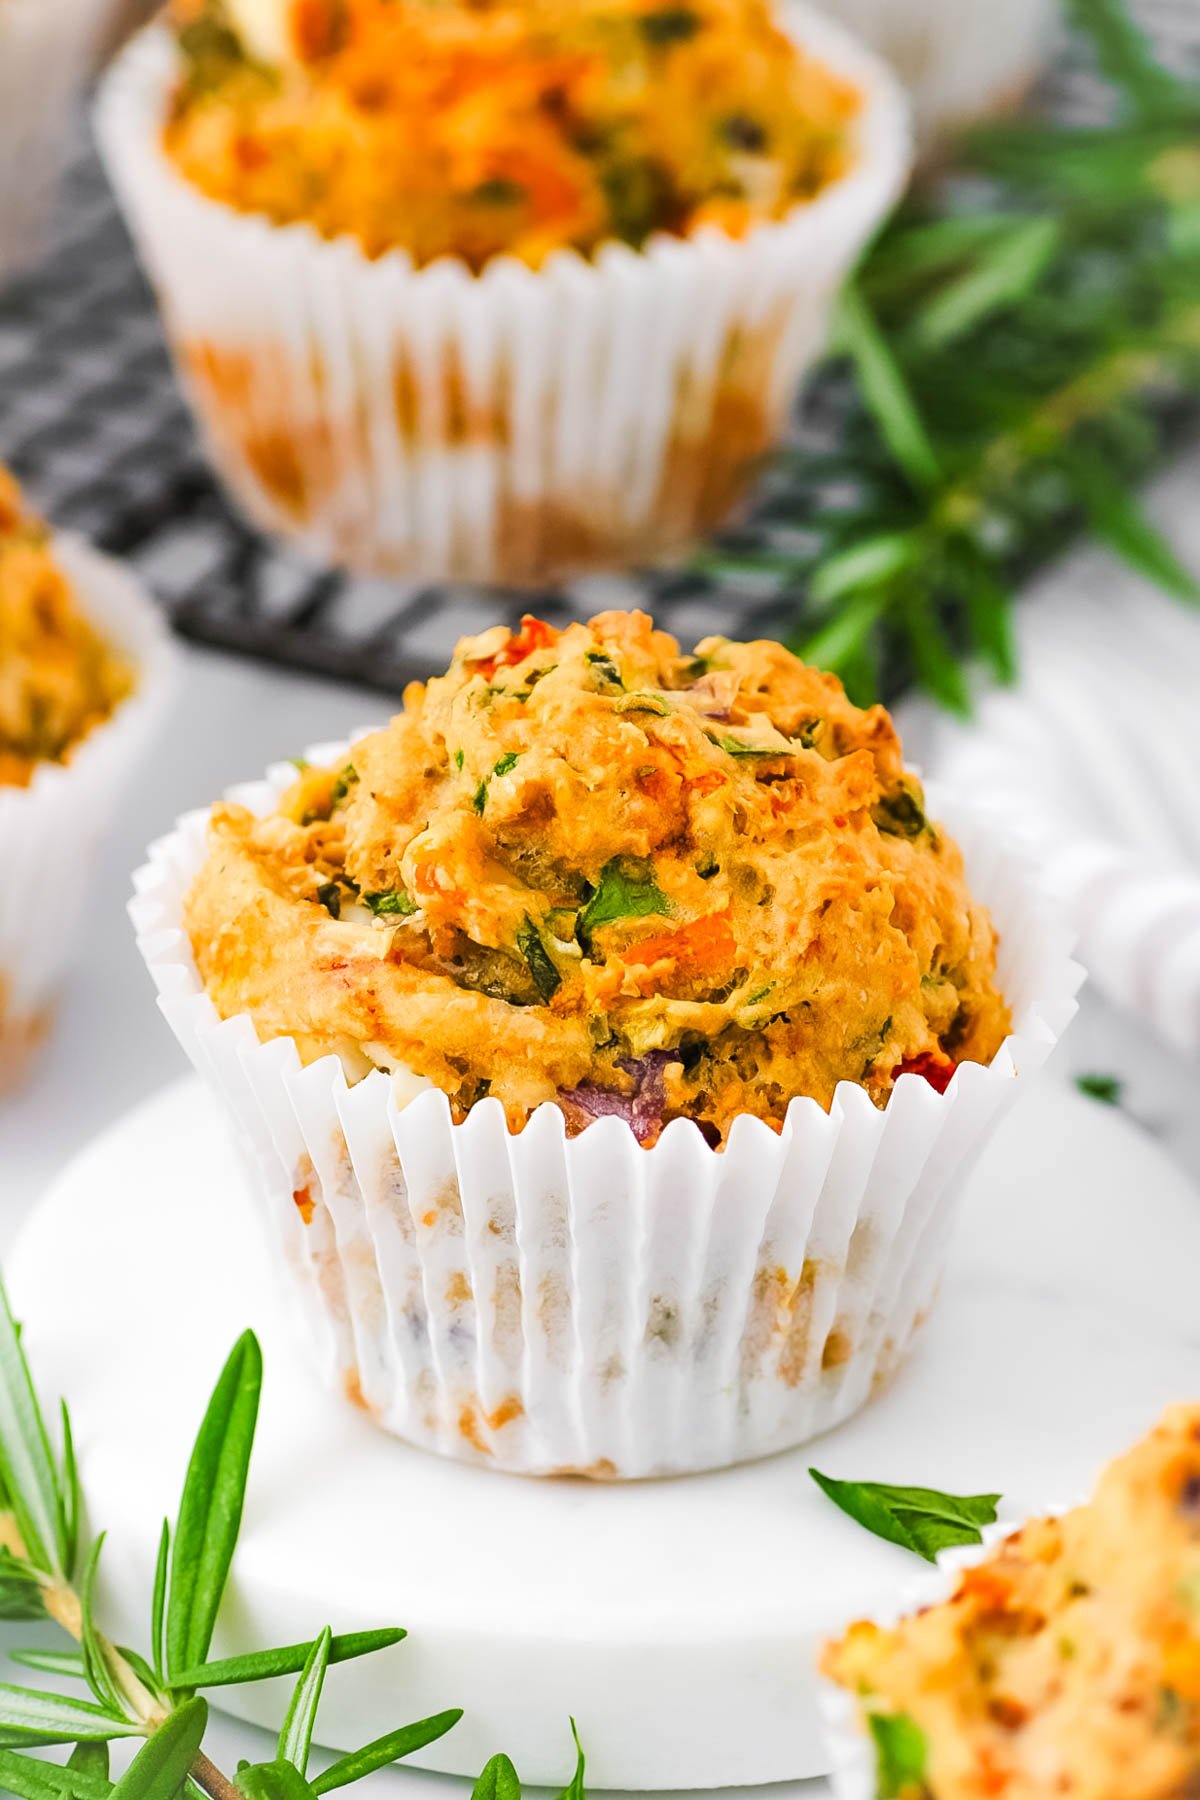 Savory Vegetable Muffins | The Picky Eater [Video]